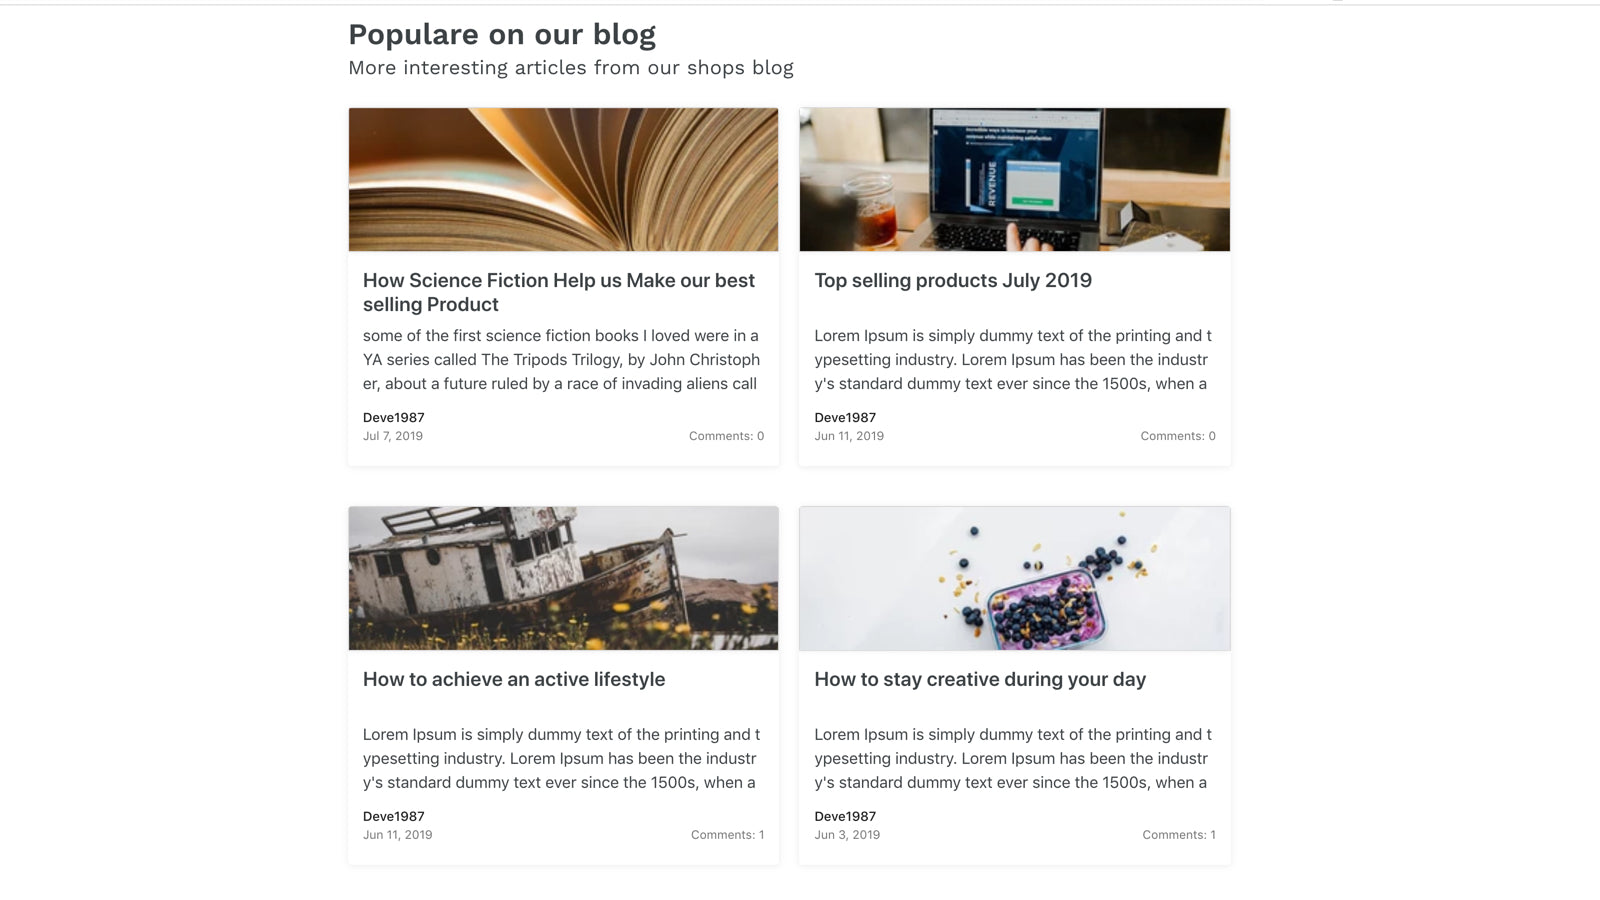 Better Related Blog Posts - Display Better Related Blog Posts in your Shop Blog'